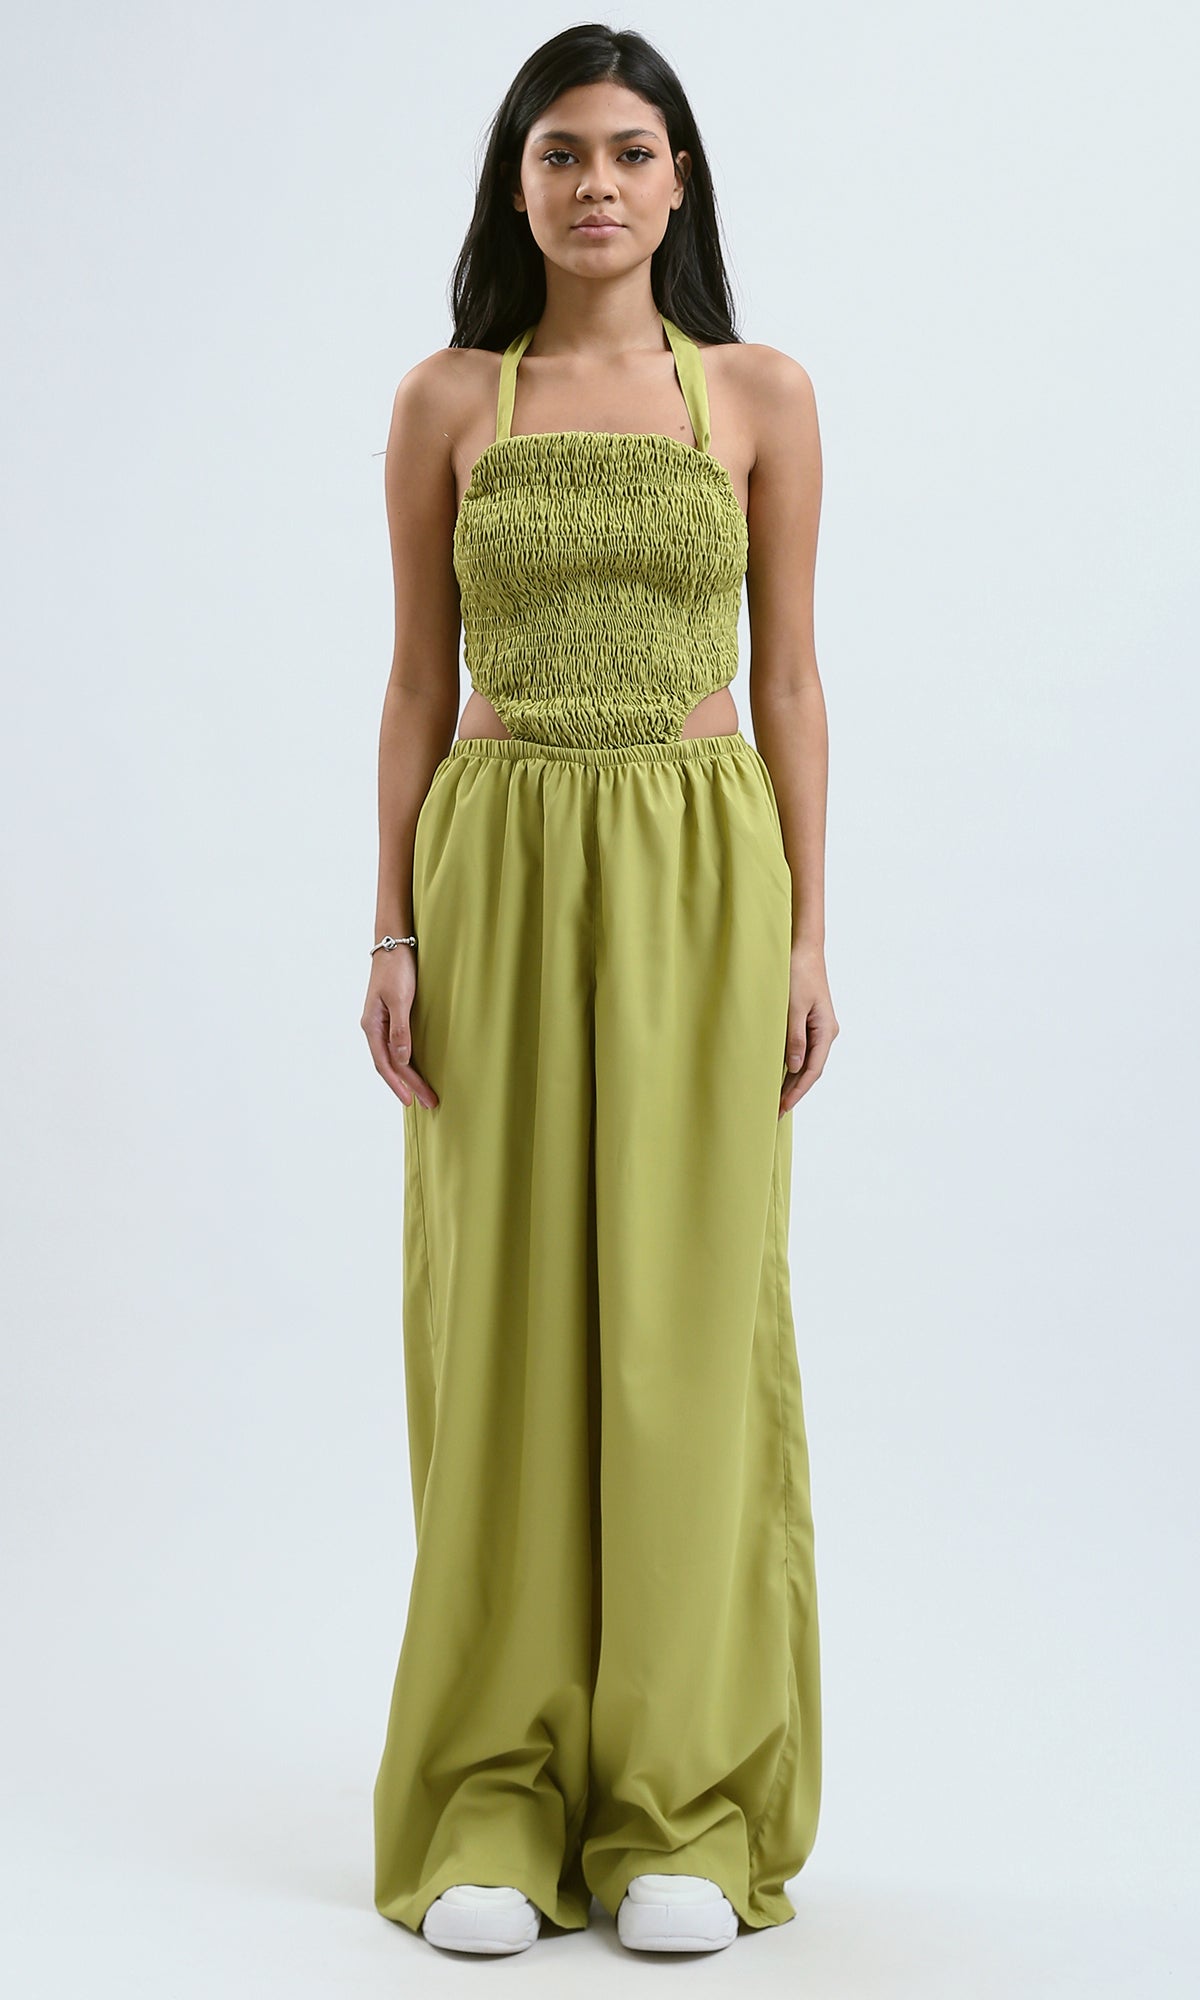 O188399 Sleeveless Lace-Up Lime Jumpsuit With Side Cuts